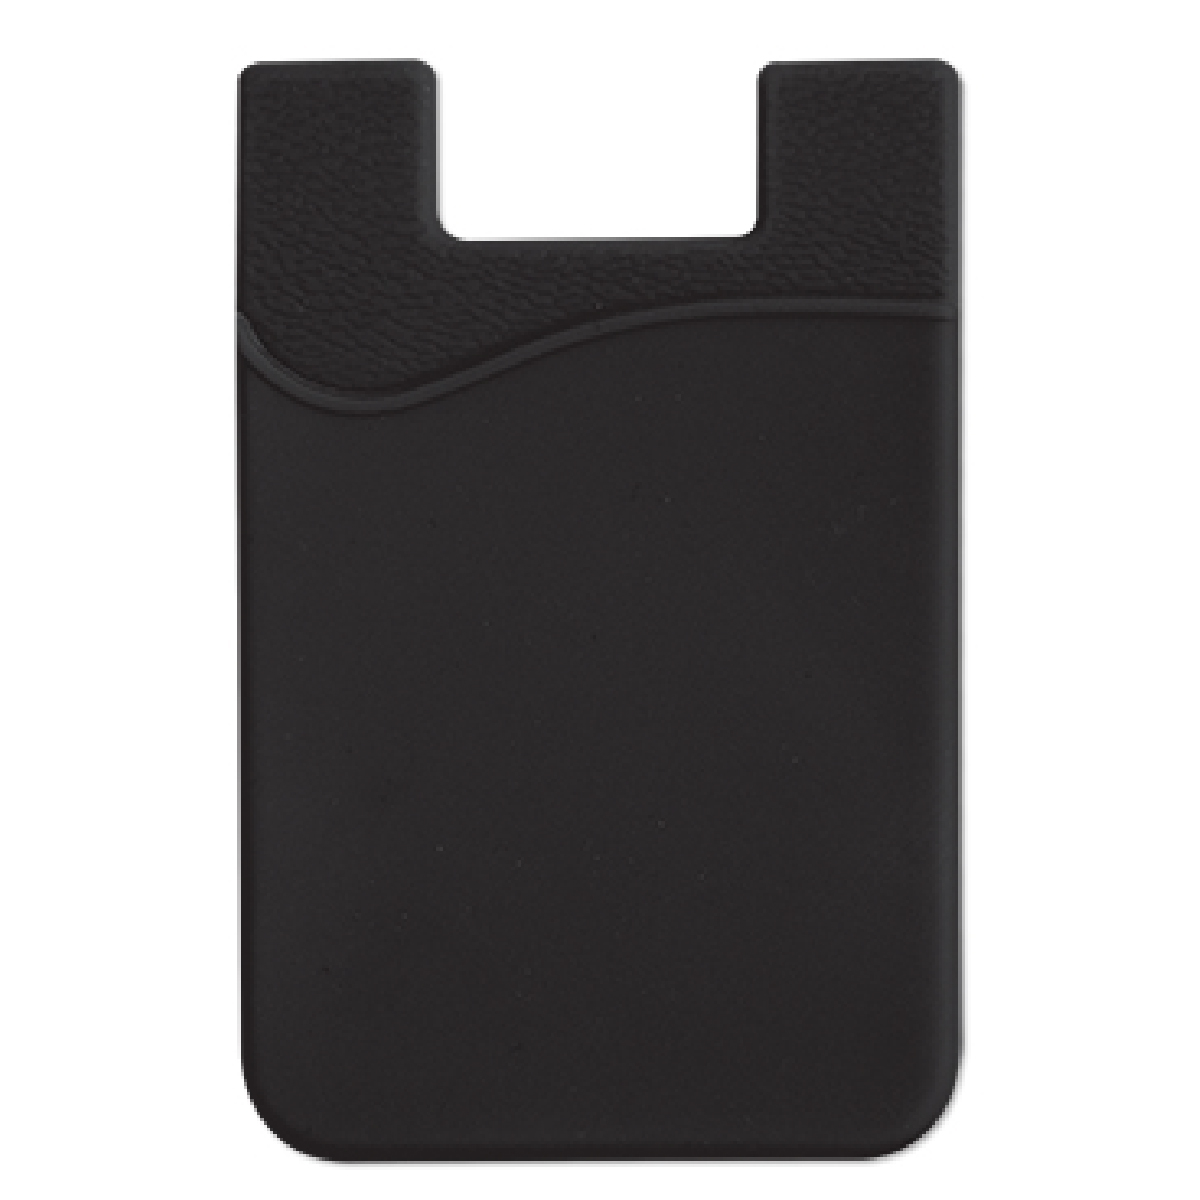 Black Silicone Smart Phone Wallet